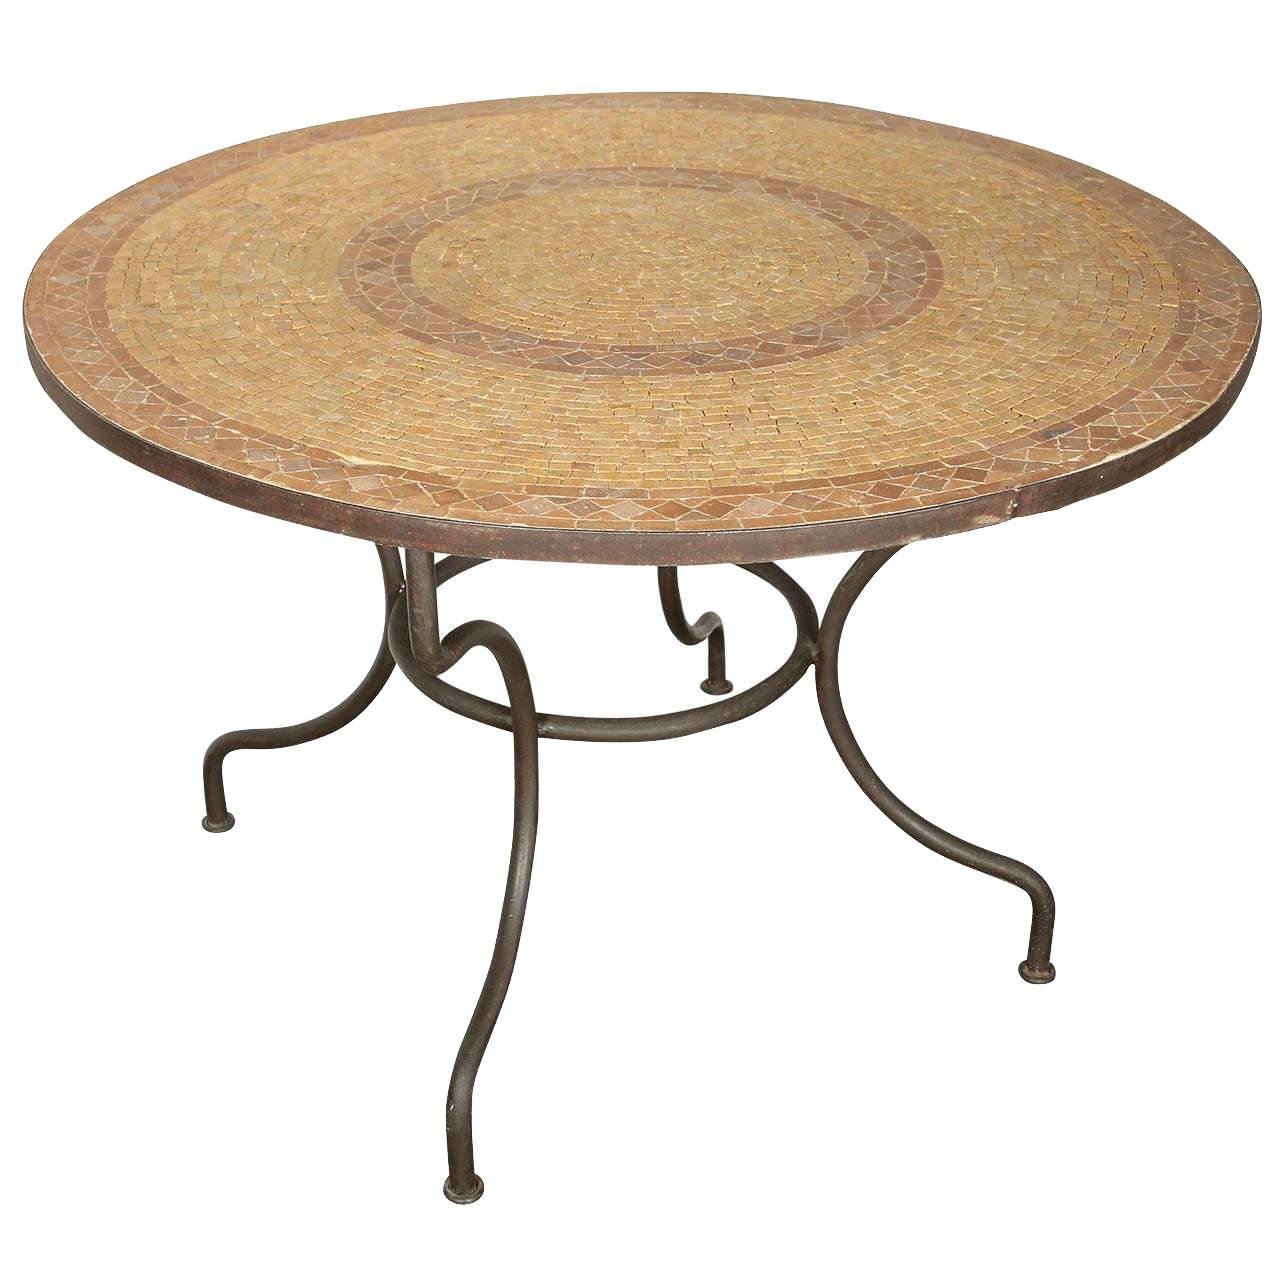 A inlaid round stone Moroccan mosaic tile tabletop on an wrought iron base.
Handcrafted in Morocco could be use indoor or outdoor.
Spanish Moorish garden dining mosaic table in the style of Bill Willis Marrakech.
The top is not attached to the